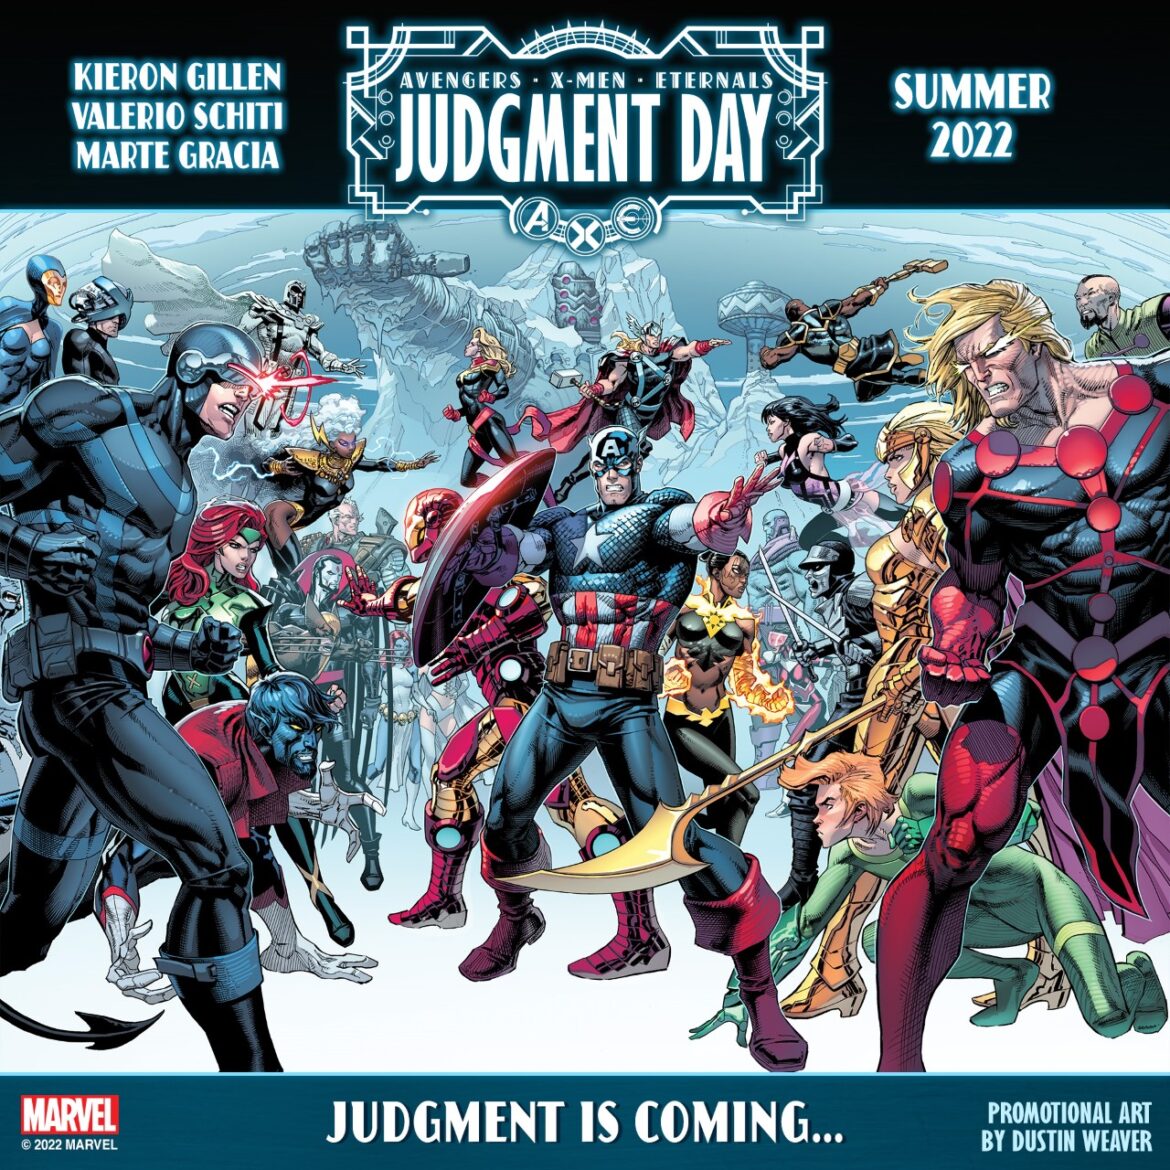 THE AVENGERS, X-MEN, AND ETERNALS FACE JUDGMENT DAY!